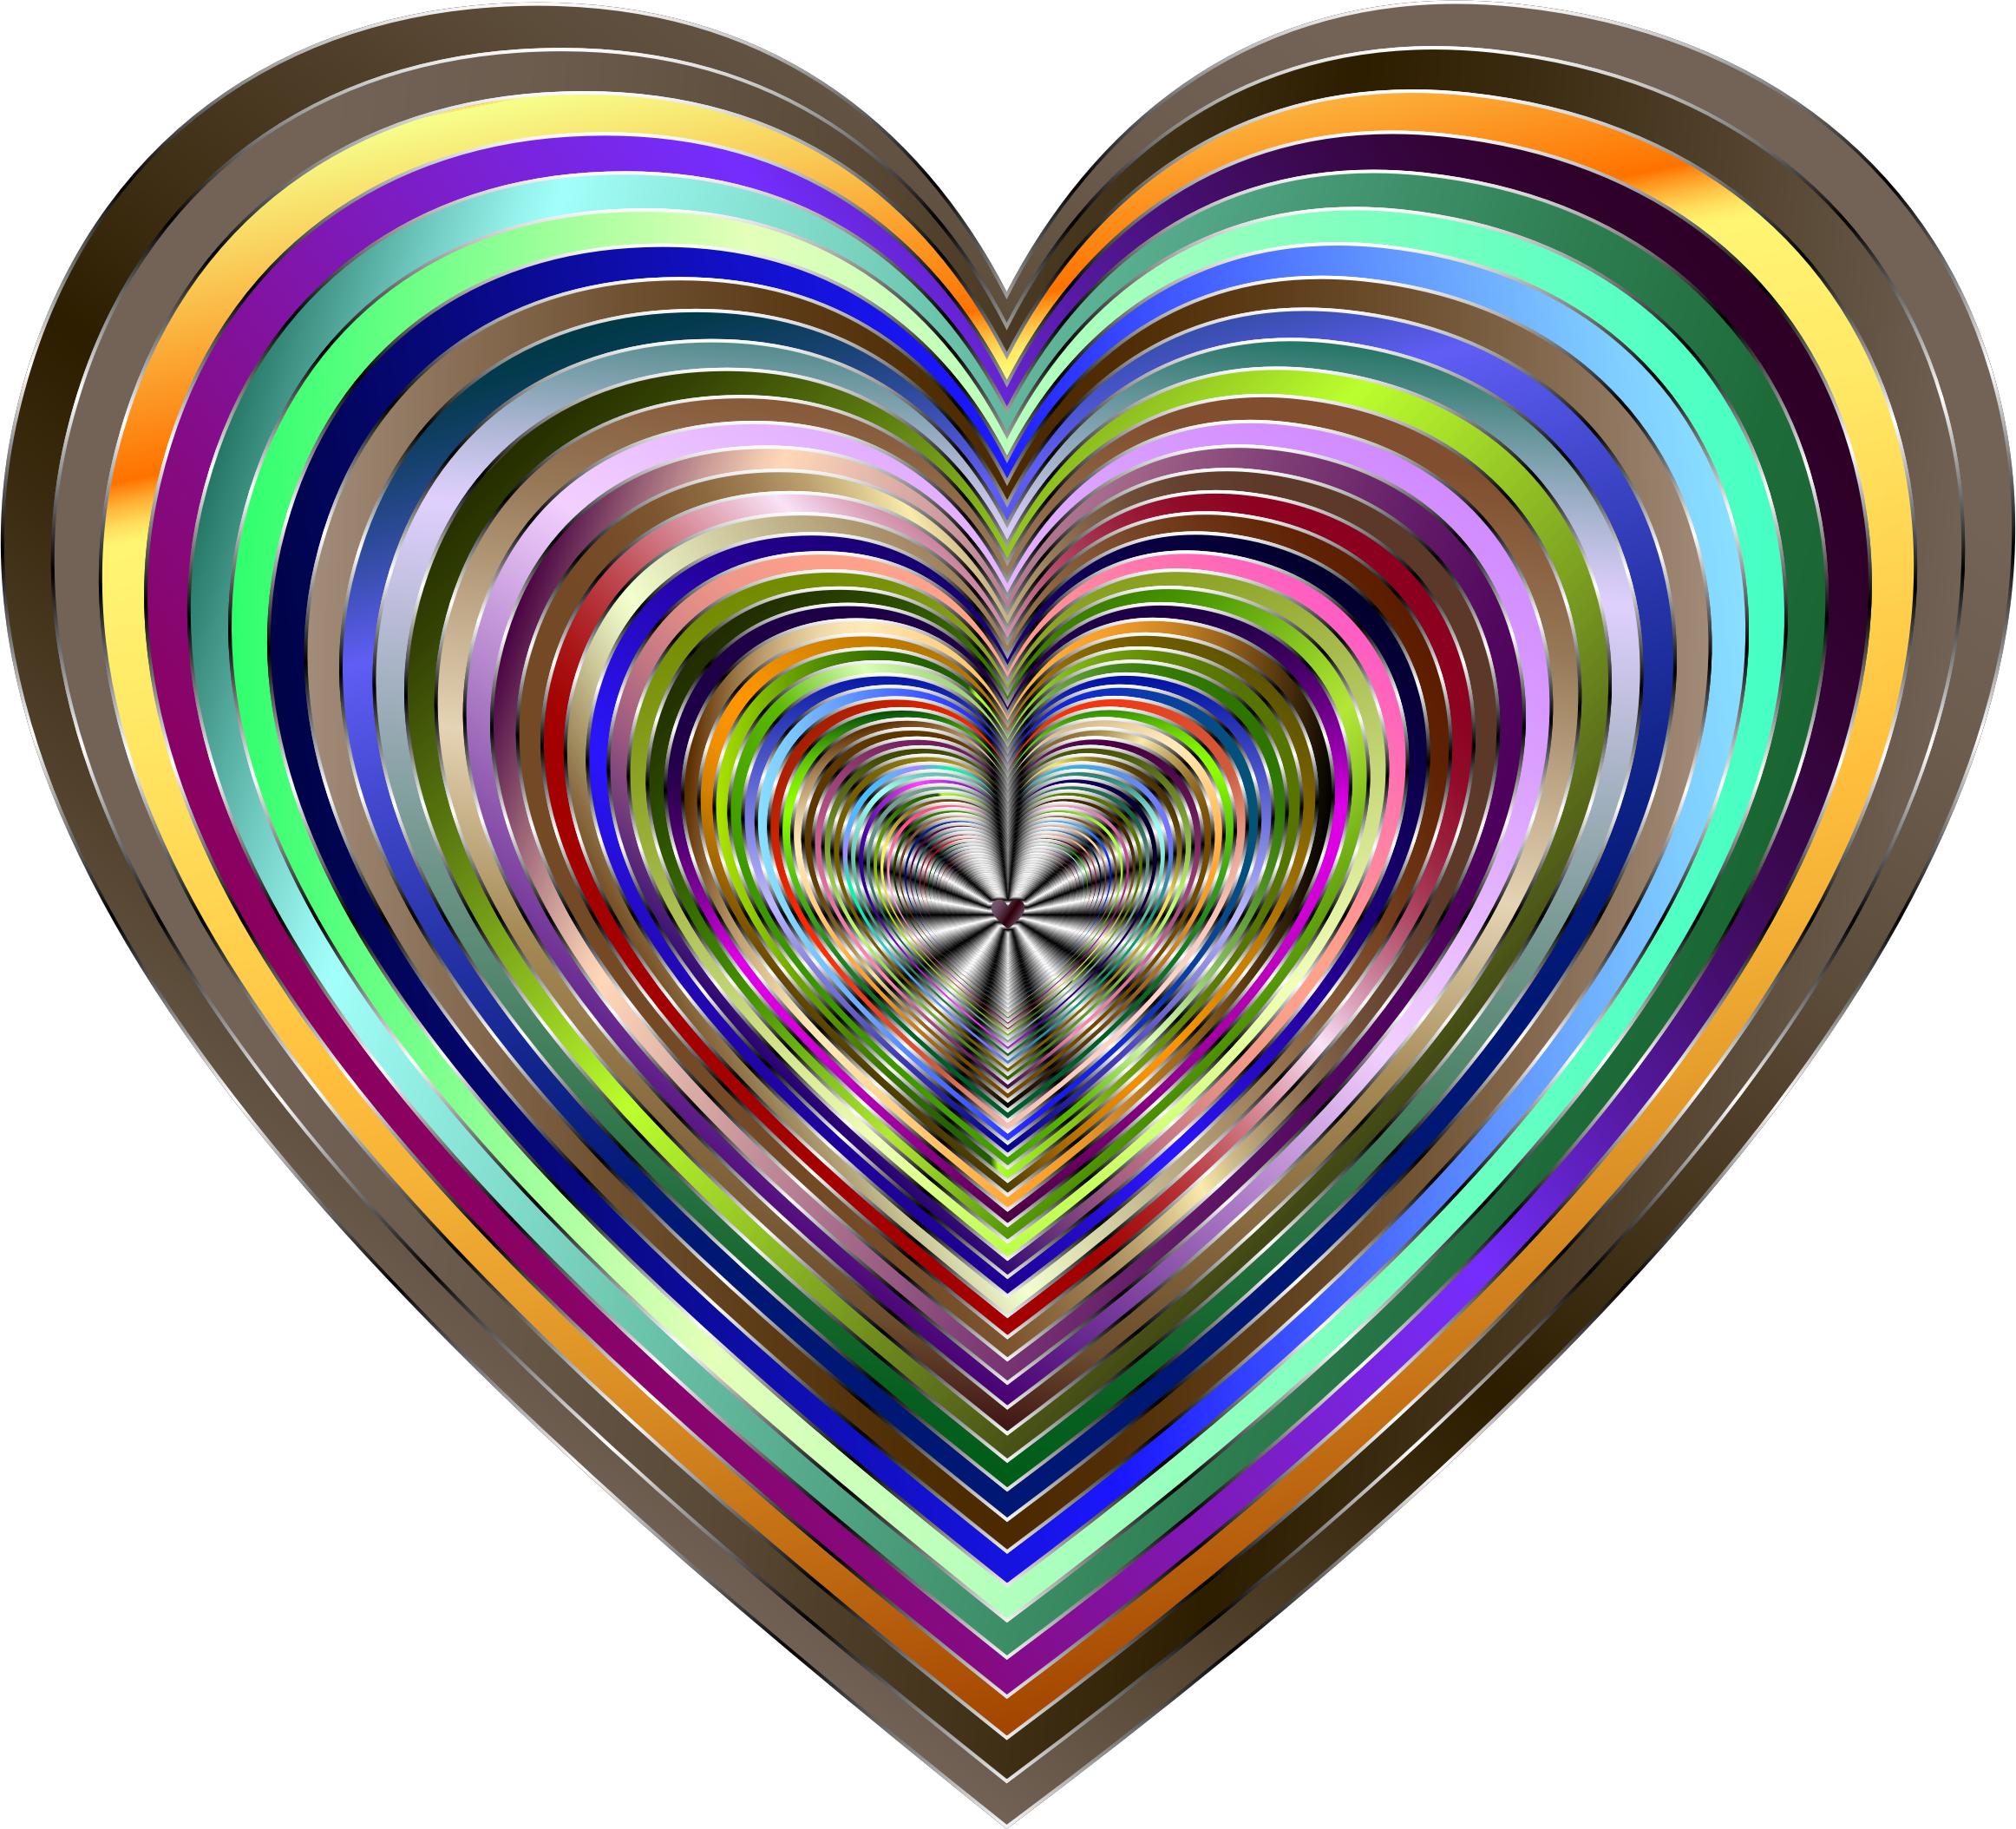 Psychedelic Hearts icons